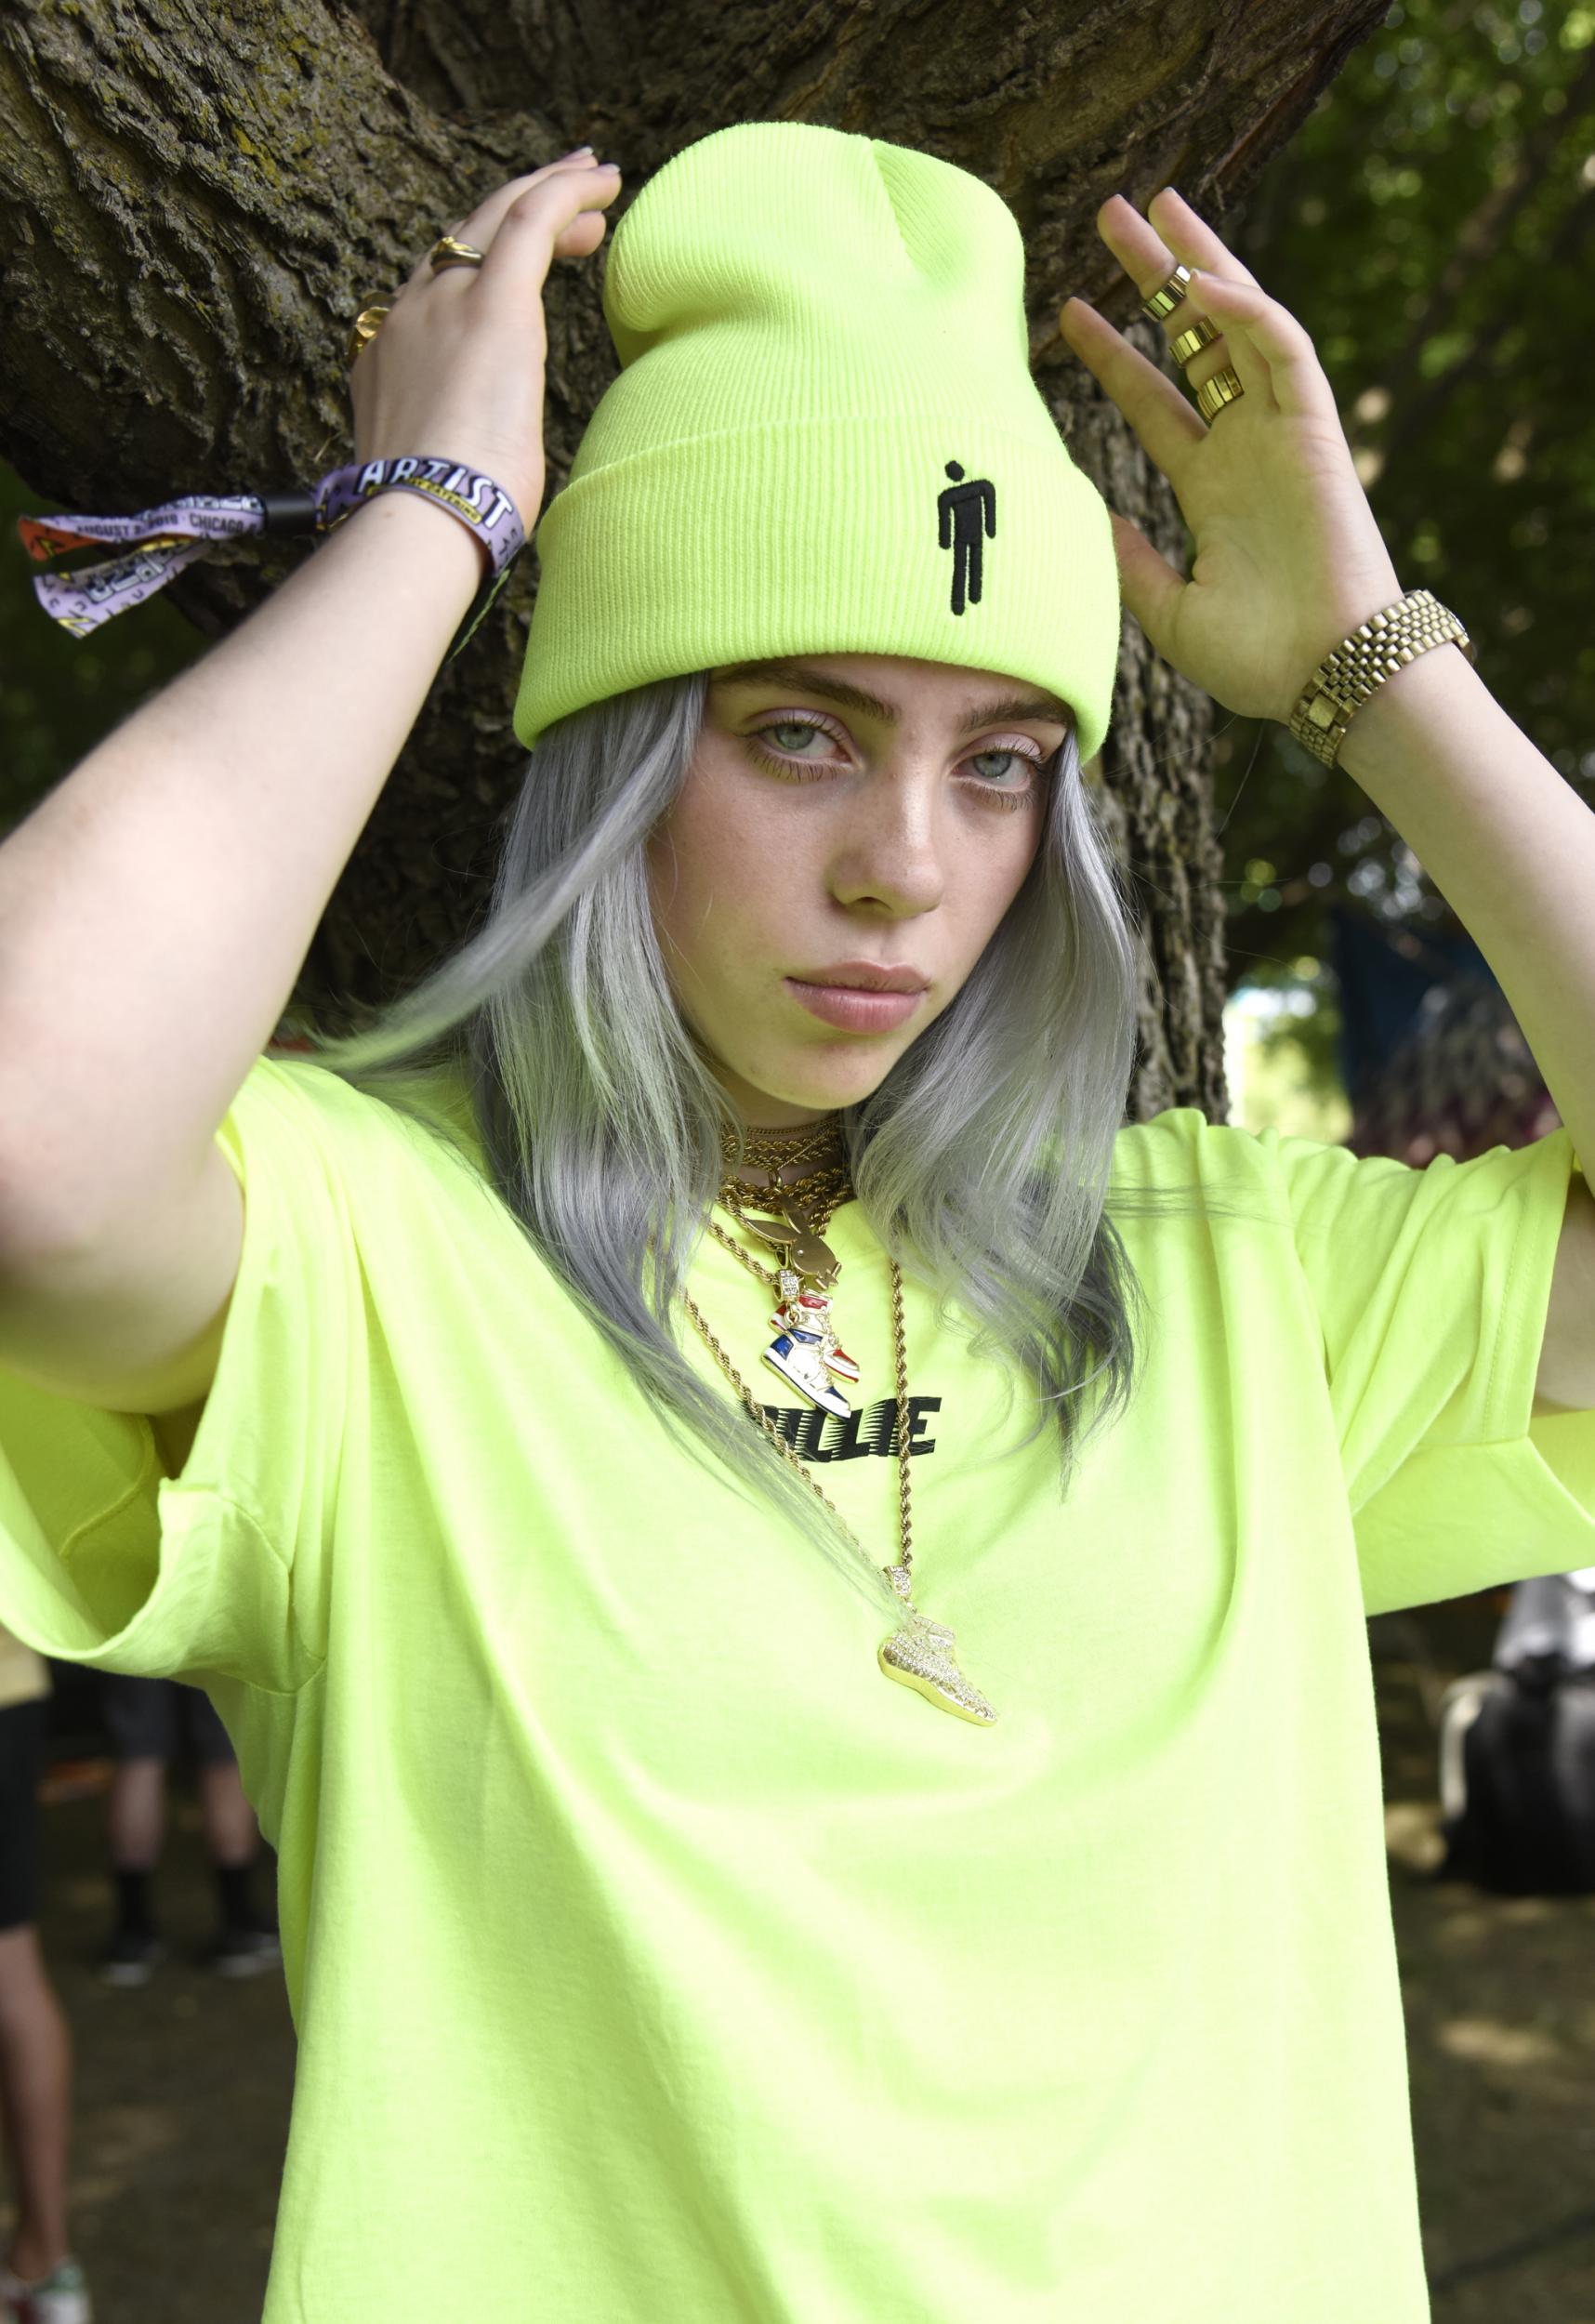 Billie Eilish poses during Lollapalooza 2018 at Grant Park on August 2, 2018 in Chicago, Illinois.